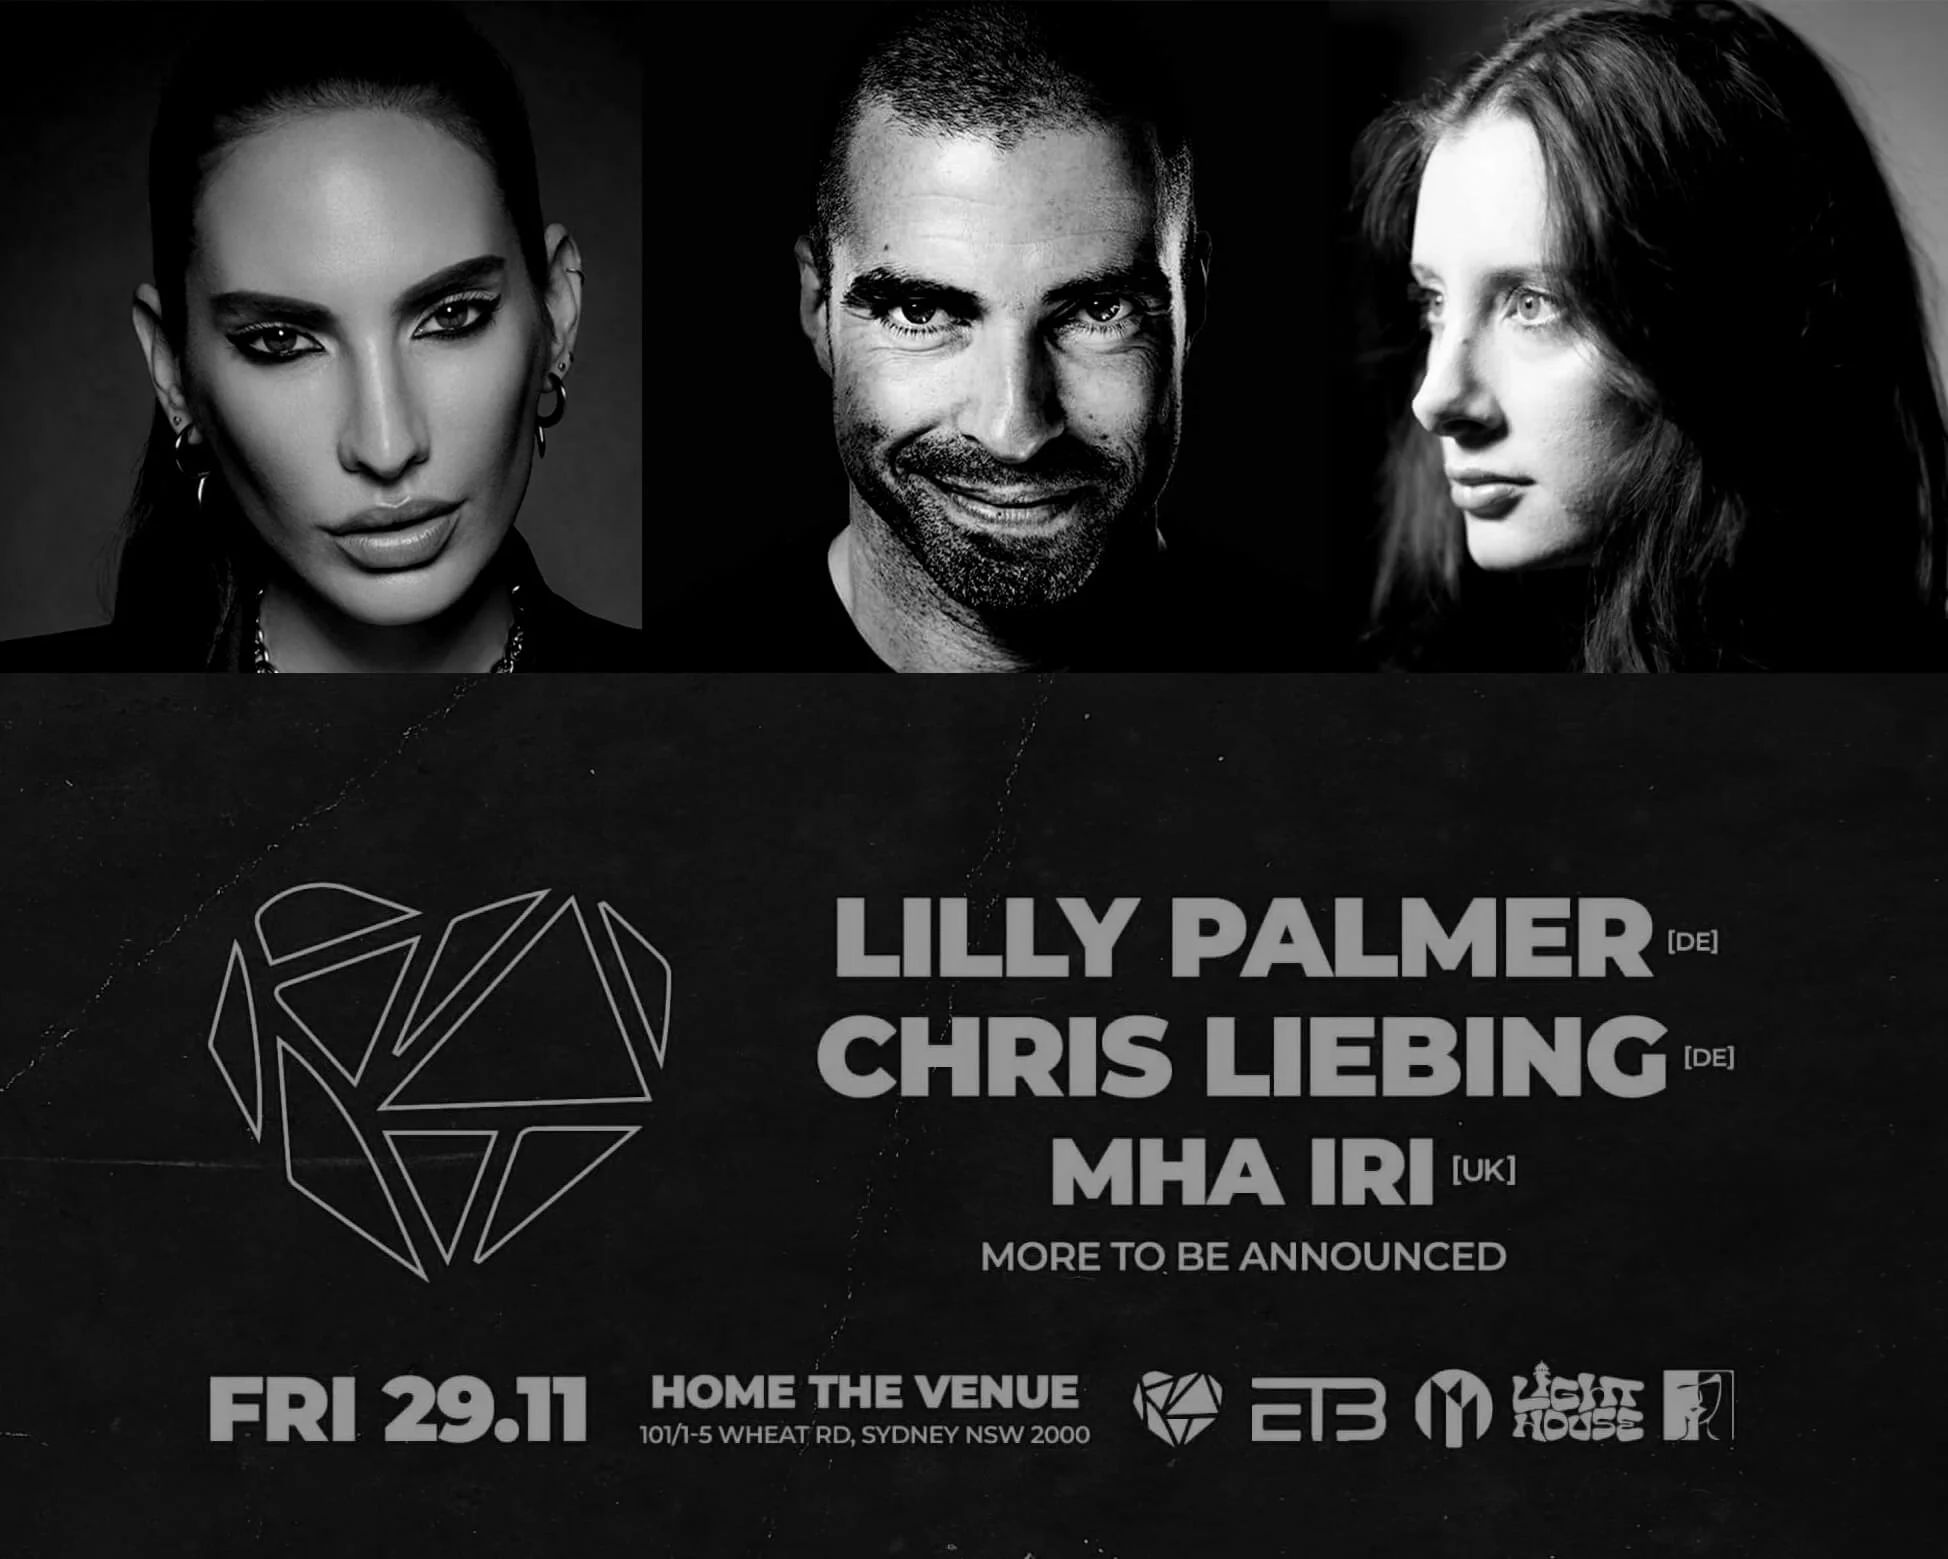 Live performance by Lilly Palmer, Chris Liebing, and Mha Iri at Home The Venue Sydney